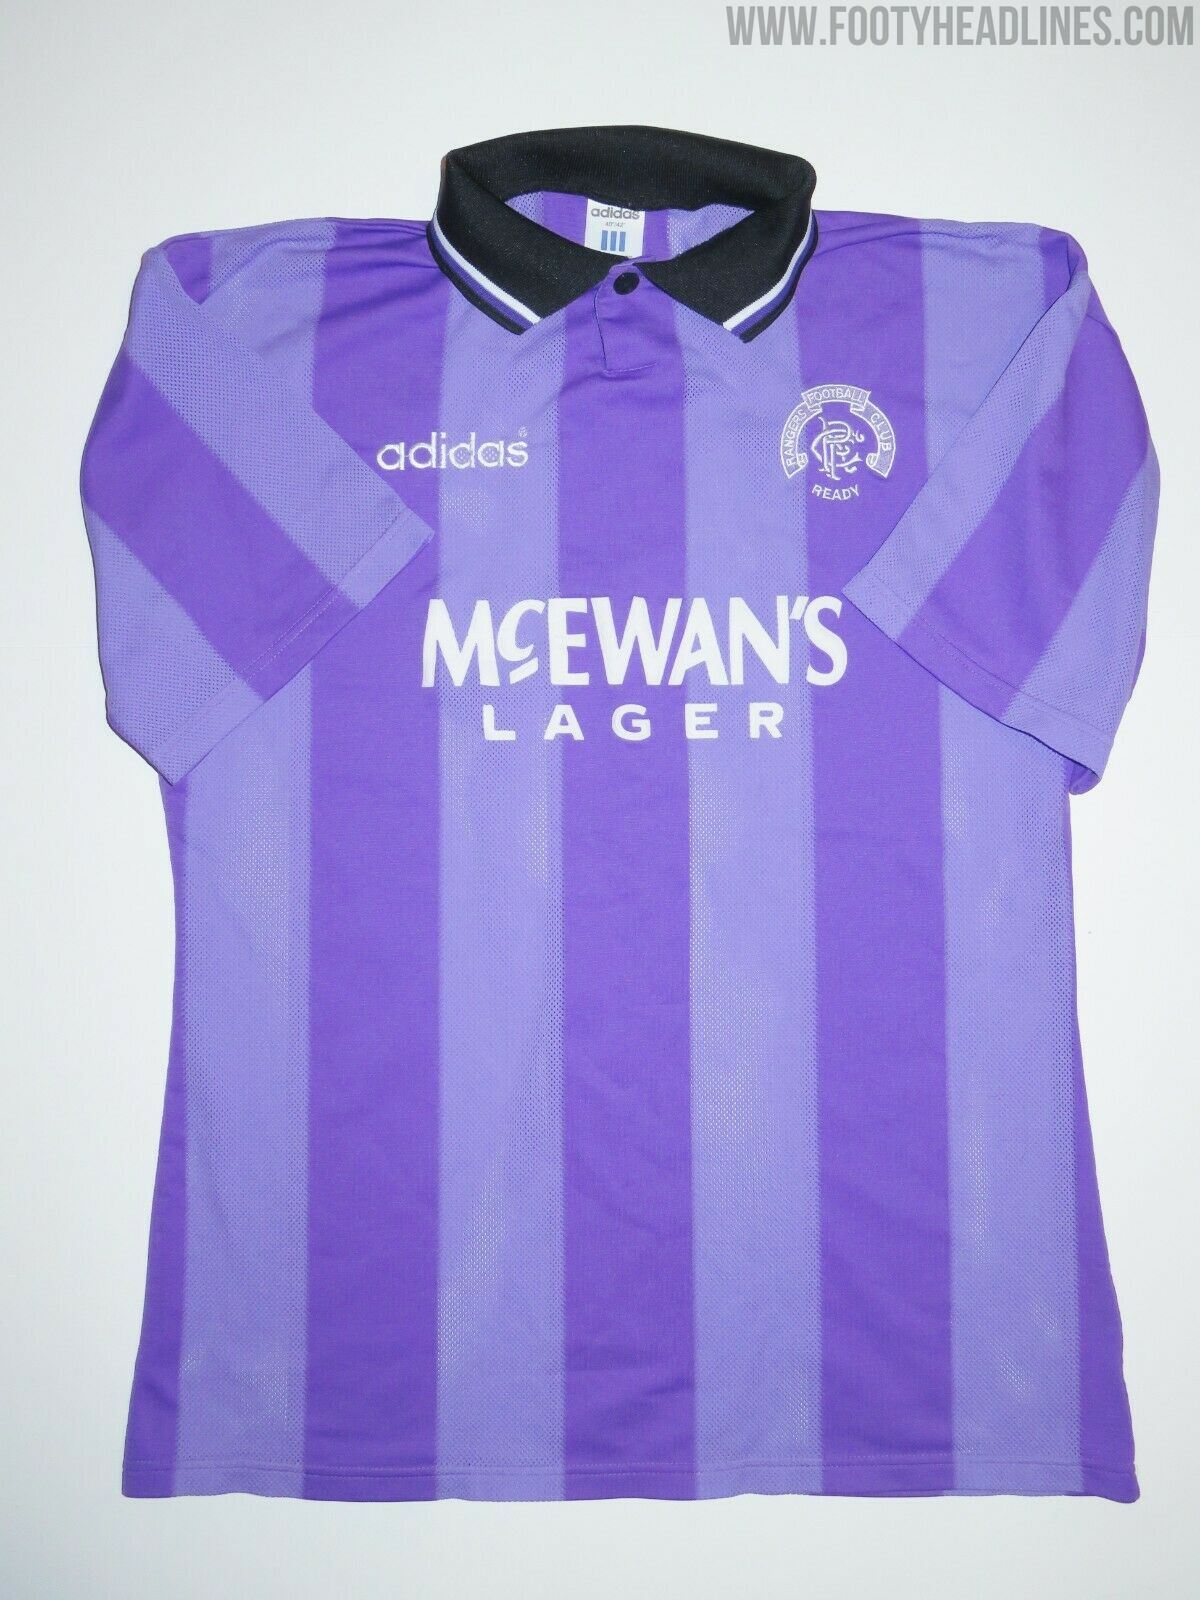 Rangers 21-22 Third Kit Released - Debut In Champions League Tonight ...